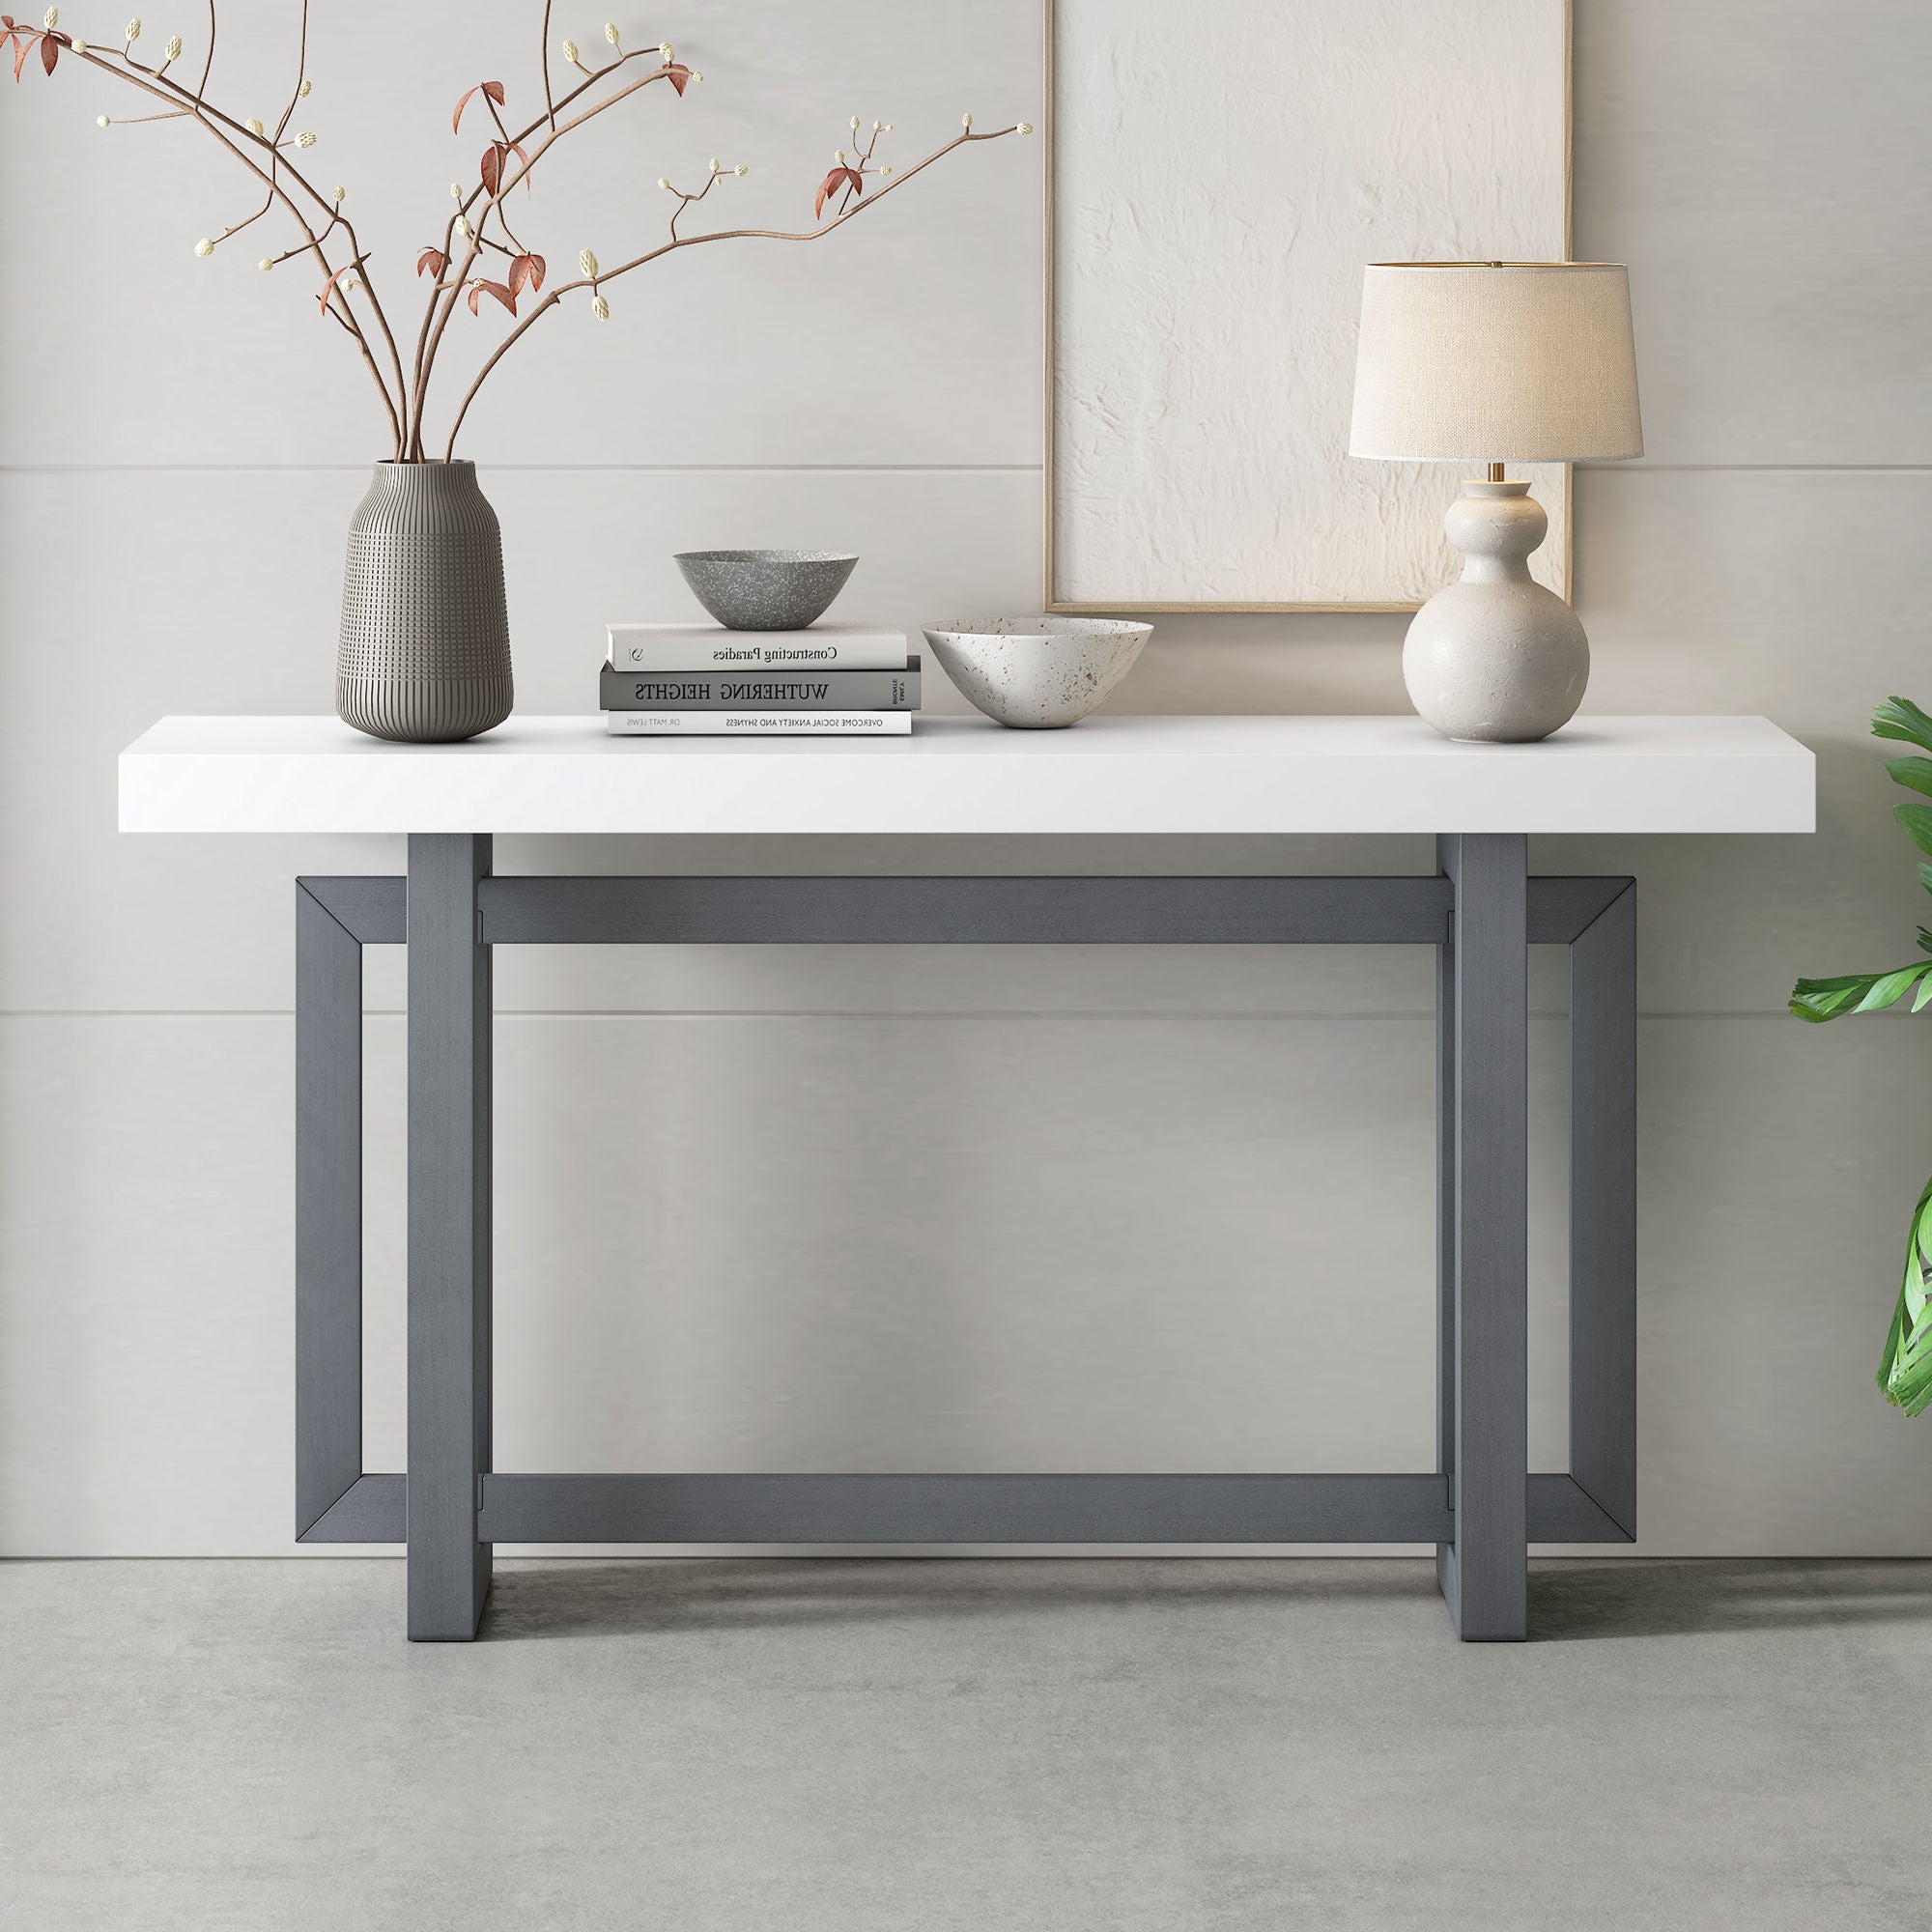 U_Style - Contemporary Console Table With Industrial - Inspired Concrete Wood Top, Extra Long Entryway Table For Entryway, Hallway, Living Room, Foyer, Corridor